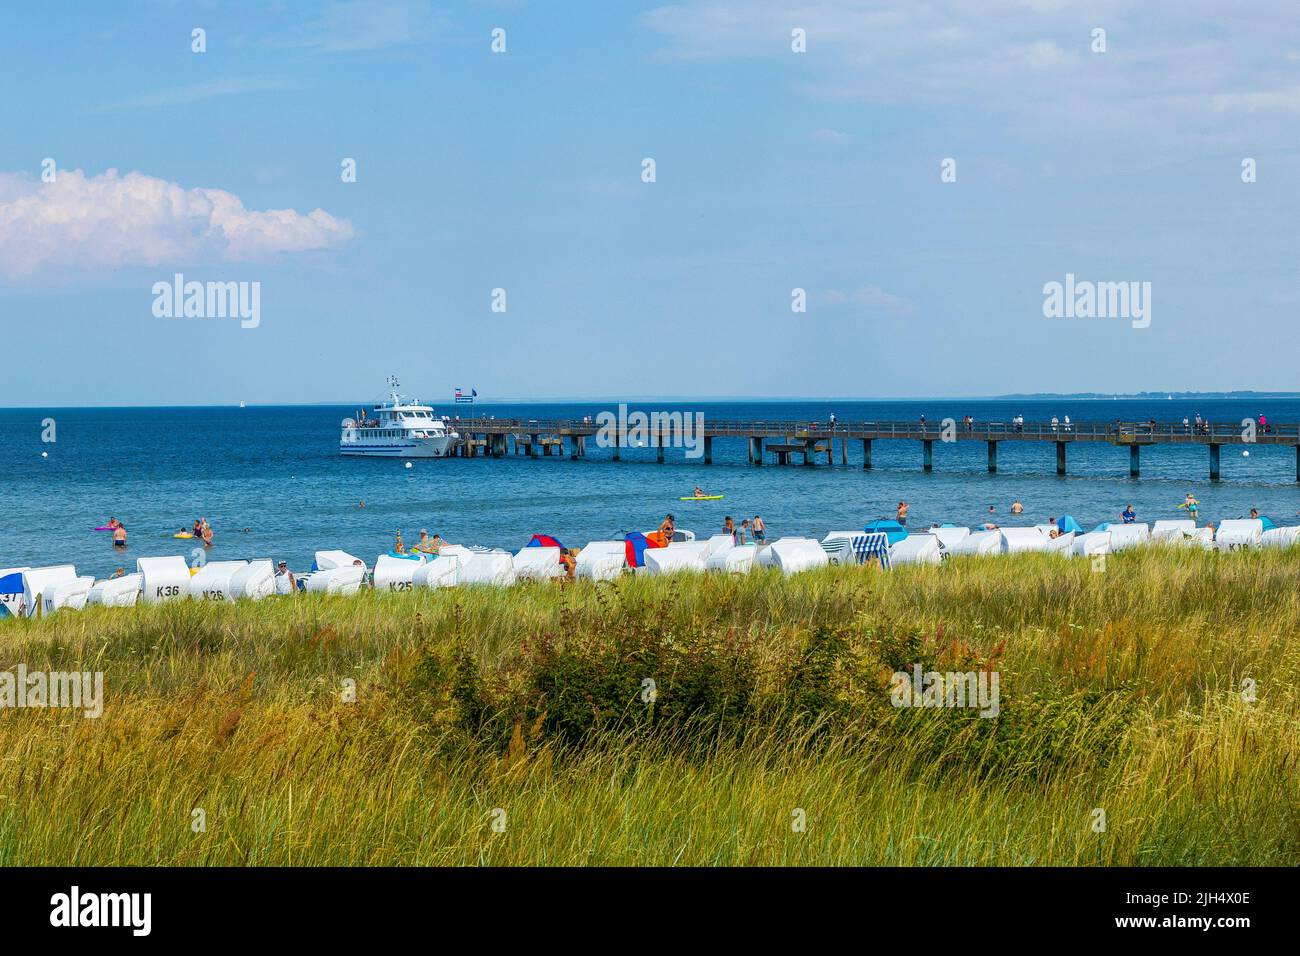 Boltenhagen, Mecklenburg-Western Pomerania, is a holiday destination with many possible leisure activities. Beach chair, sea bridge, white ship. Stock Photo